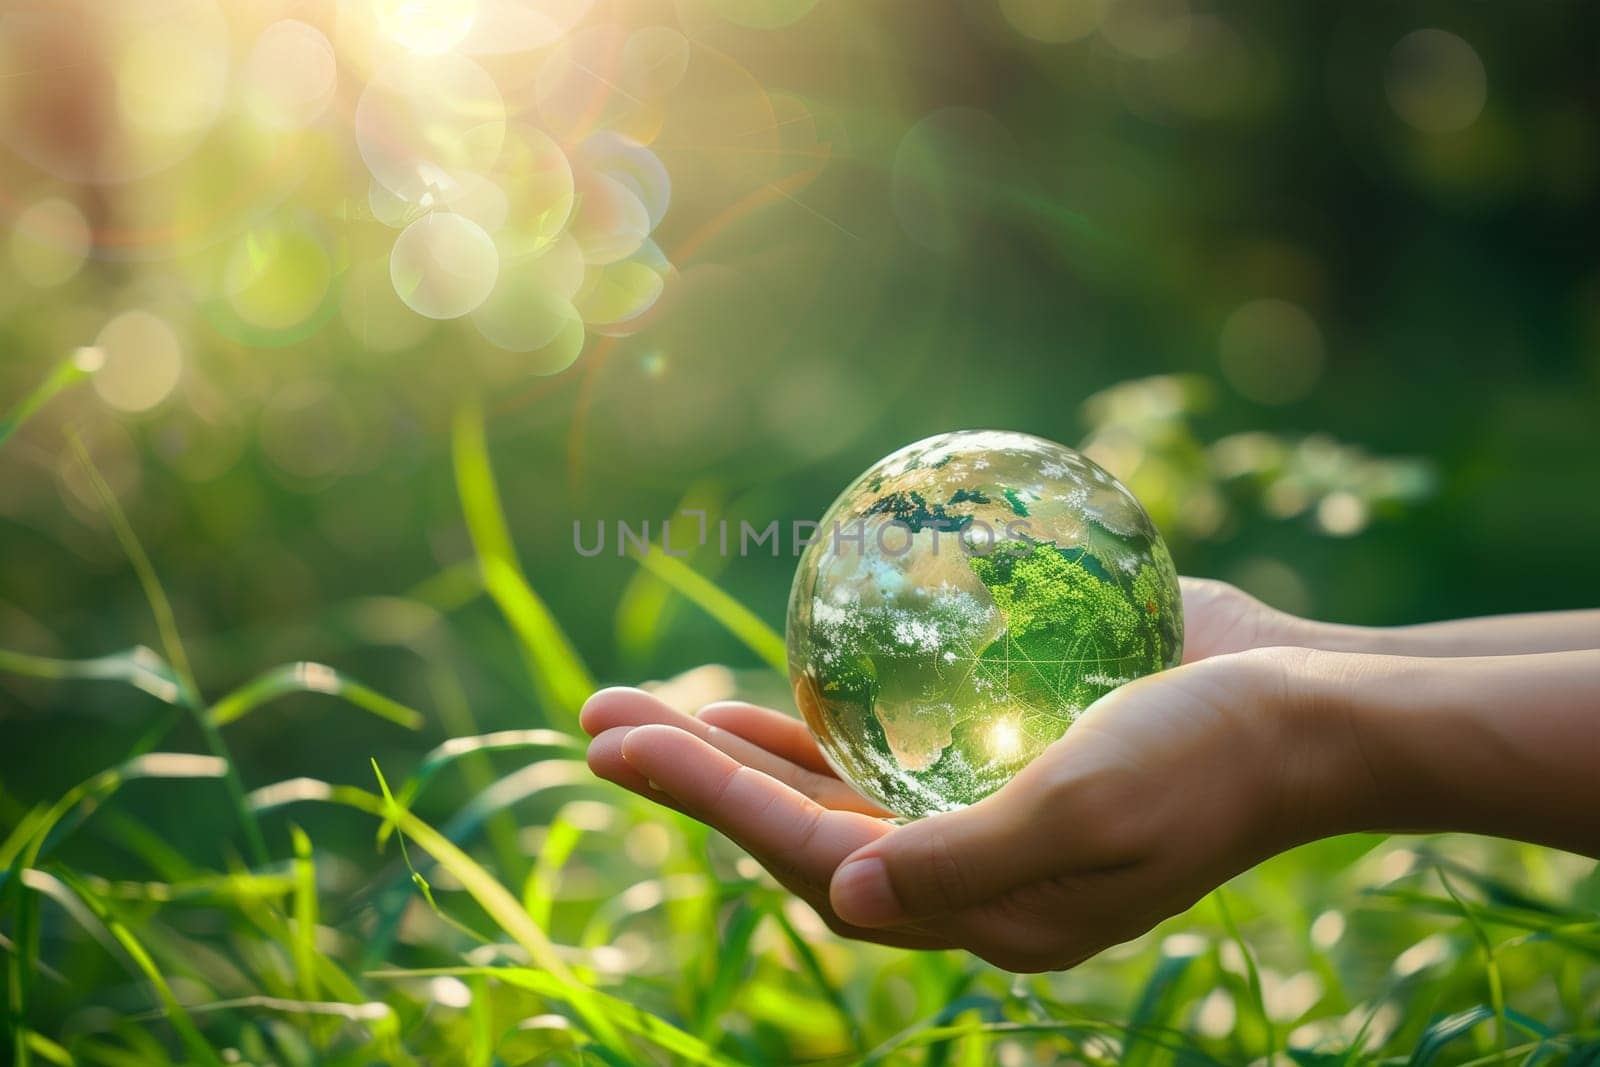 Child Holding Globe in Hands by Sd28DimoN_1976